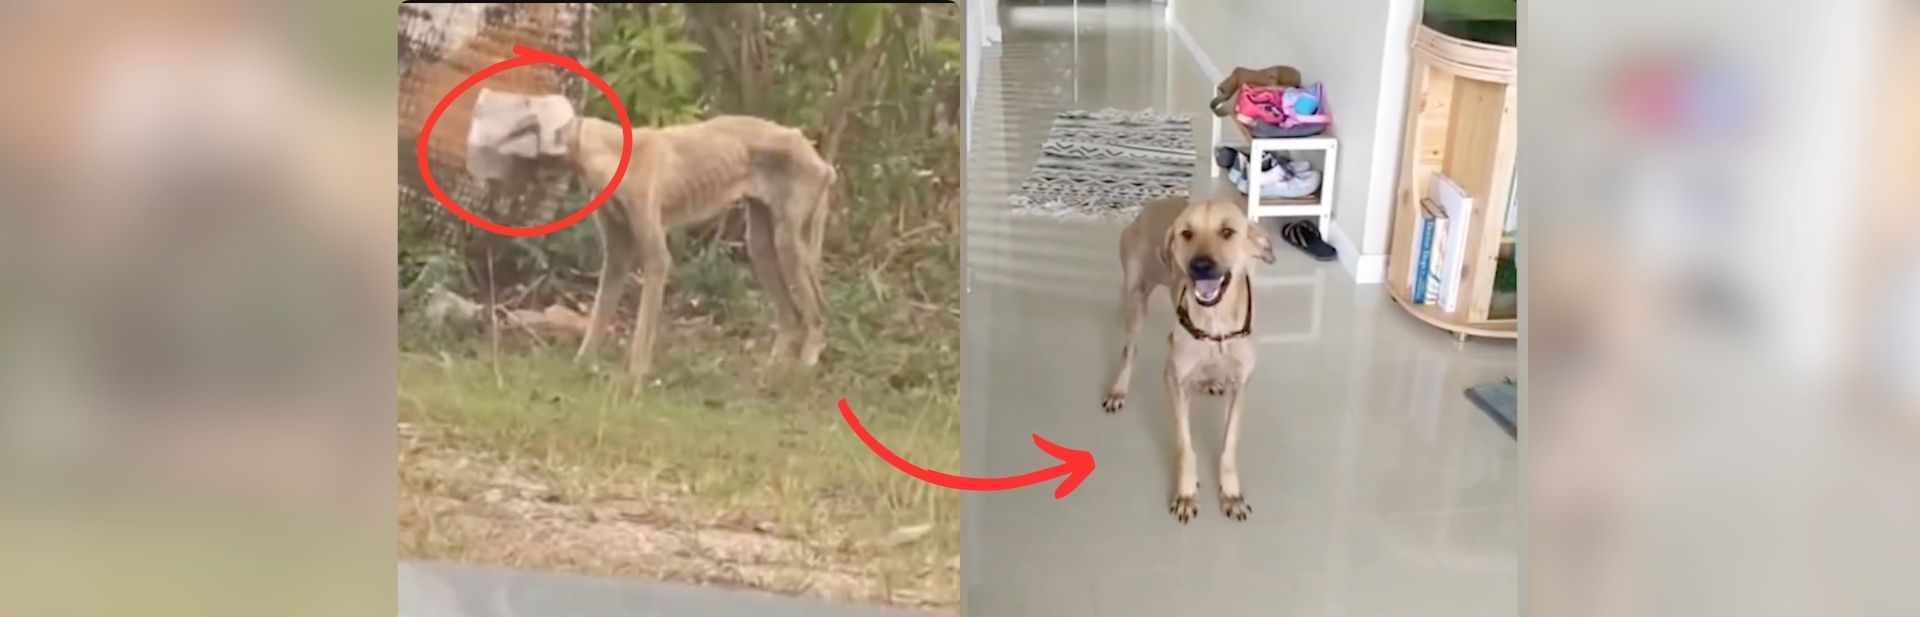 Dog With Head Stuck in Jar Finds Freedom and a Forever Home